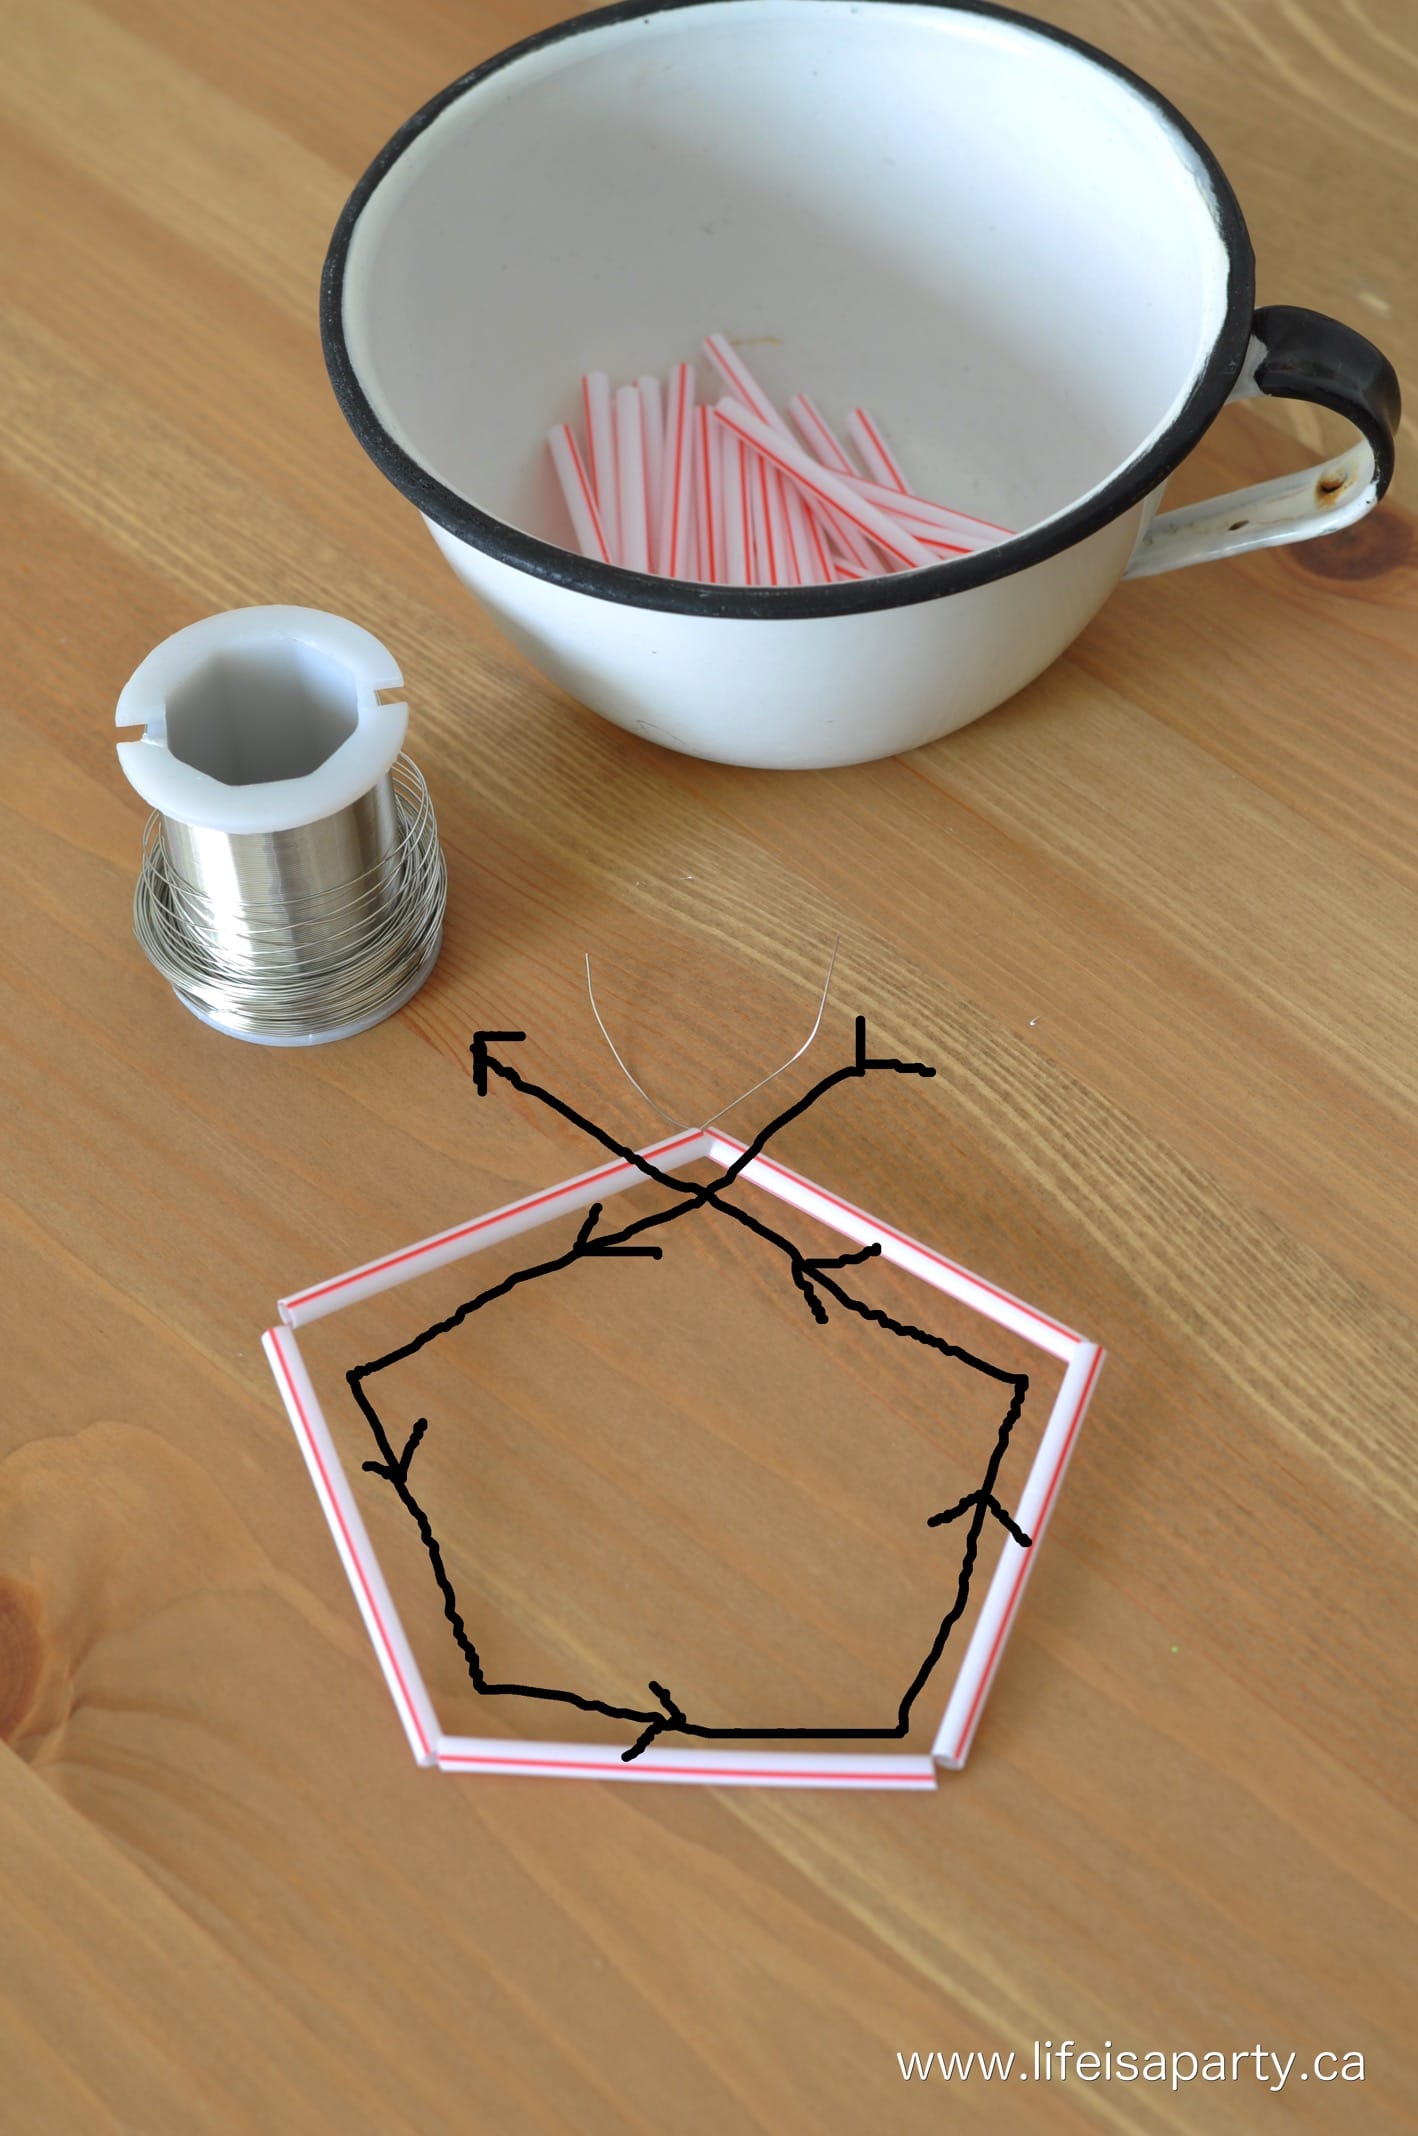 Himmeli with wire and cocktail straws